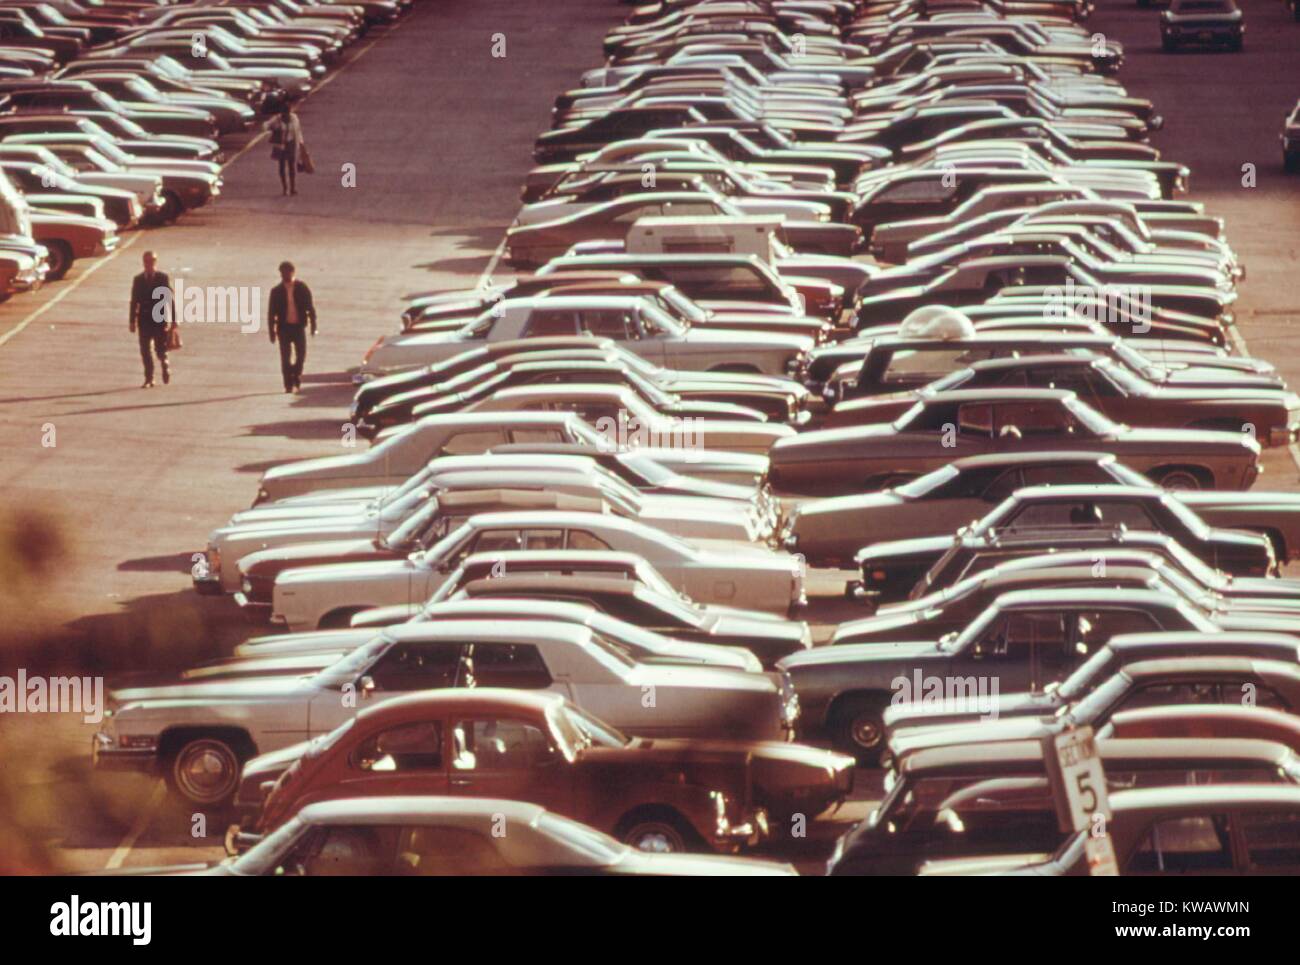 Men return to their cars at the end of the day in Monroe Street Parking Lot where hundreds of vehicles are parked in Chicago, Illinois, 1973. Image courtesy National Archives. Stock Photo